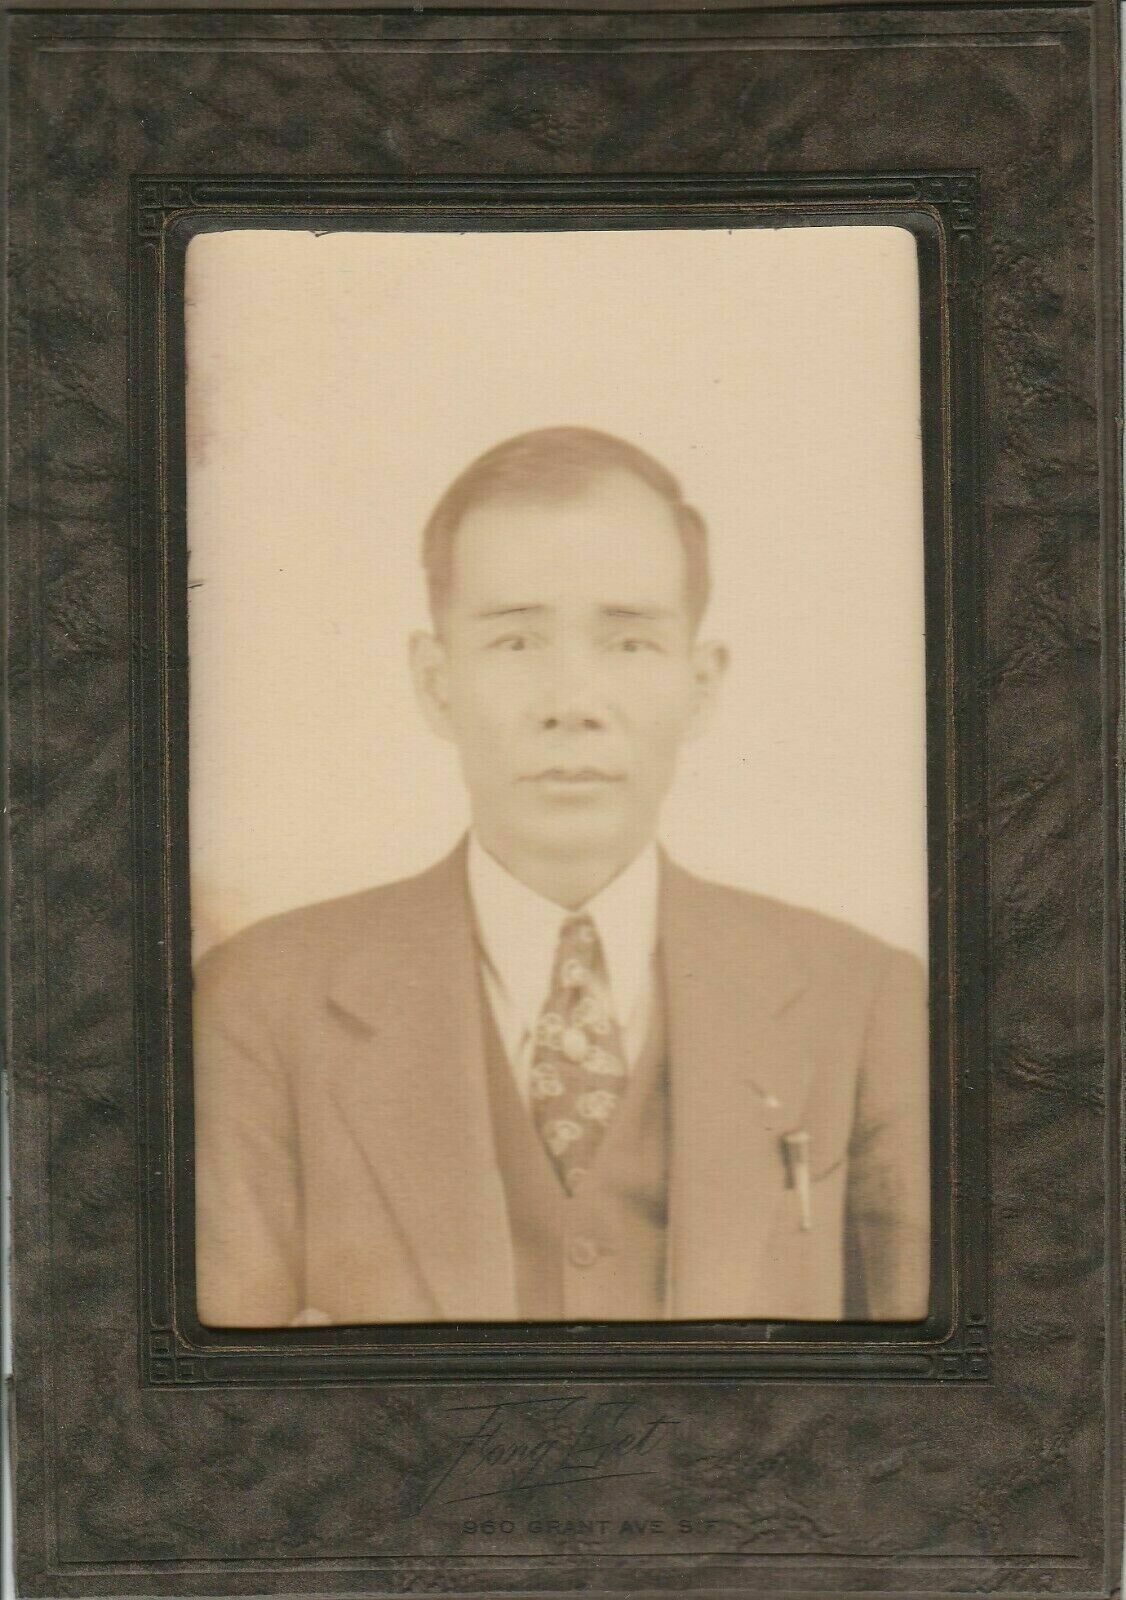 ORIGINAL PHOTO CHINESE AMERICAN RARE BY FONG GET SAN FRANCISCO 960 grant ave